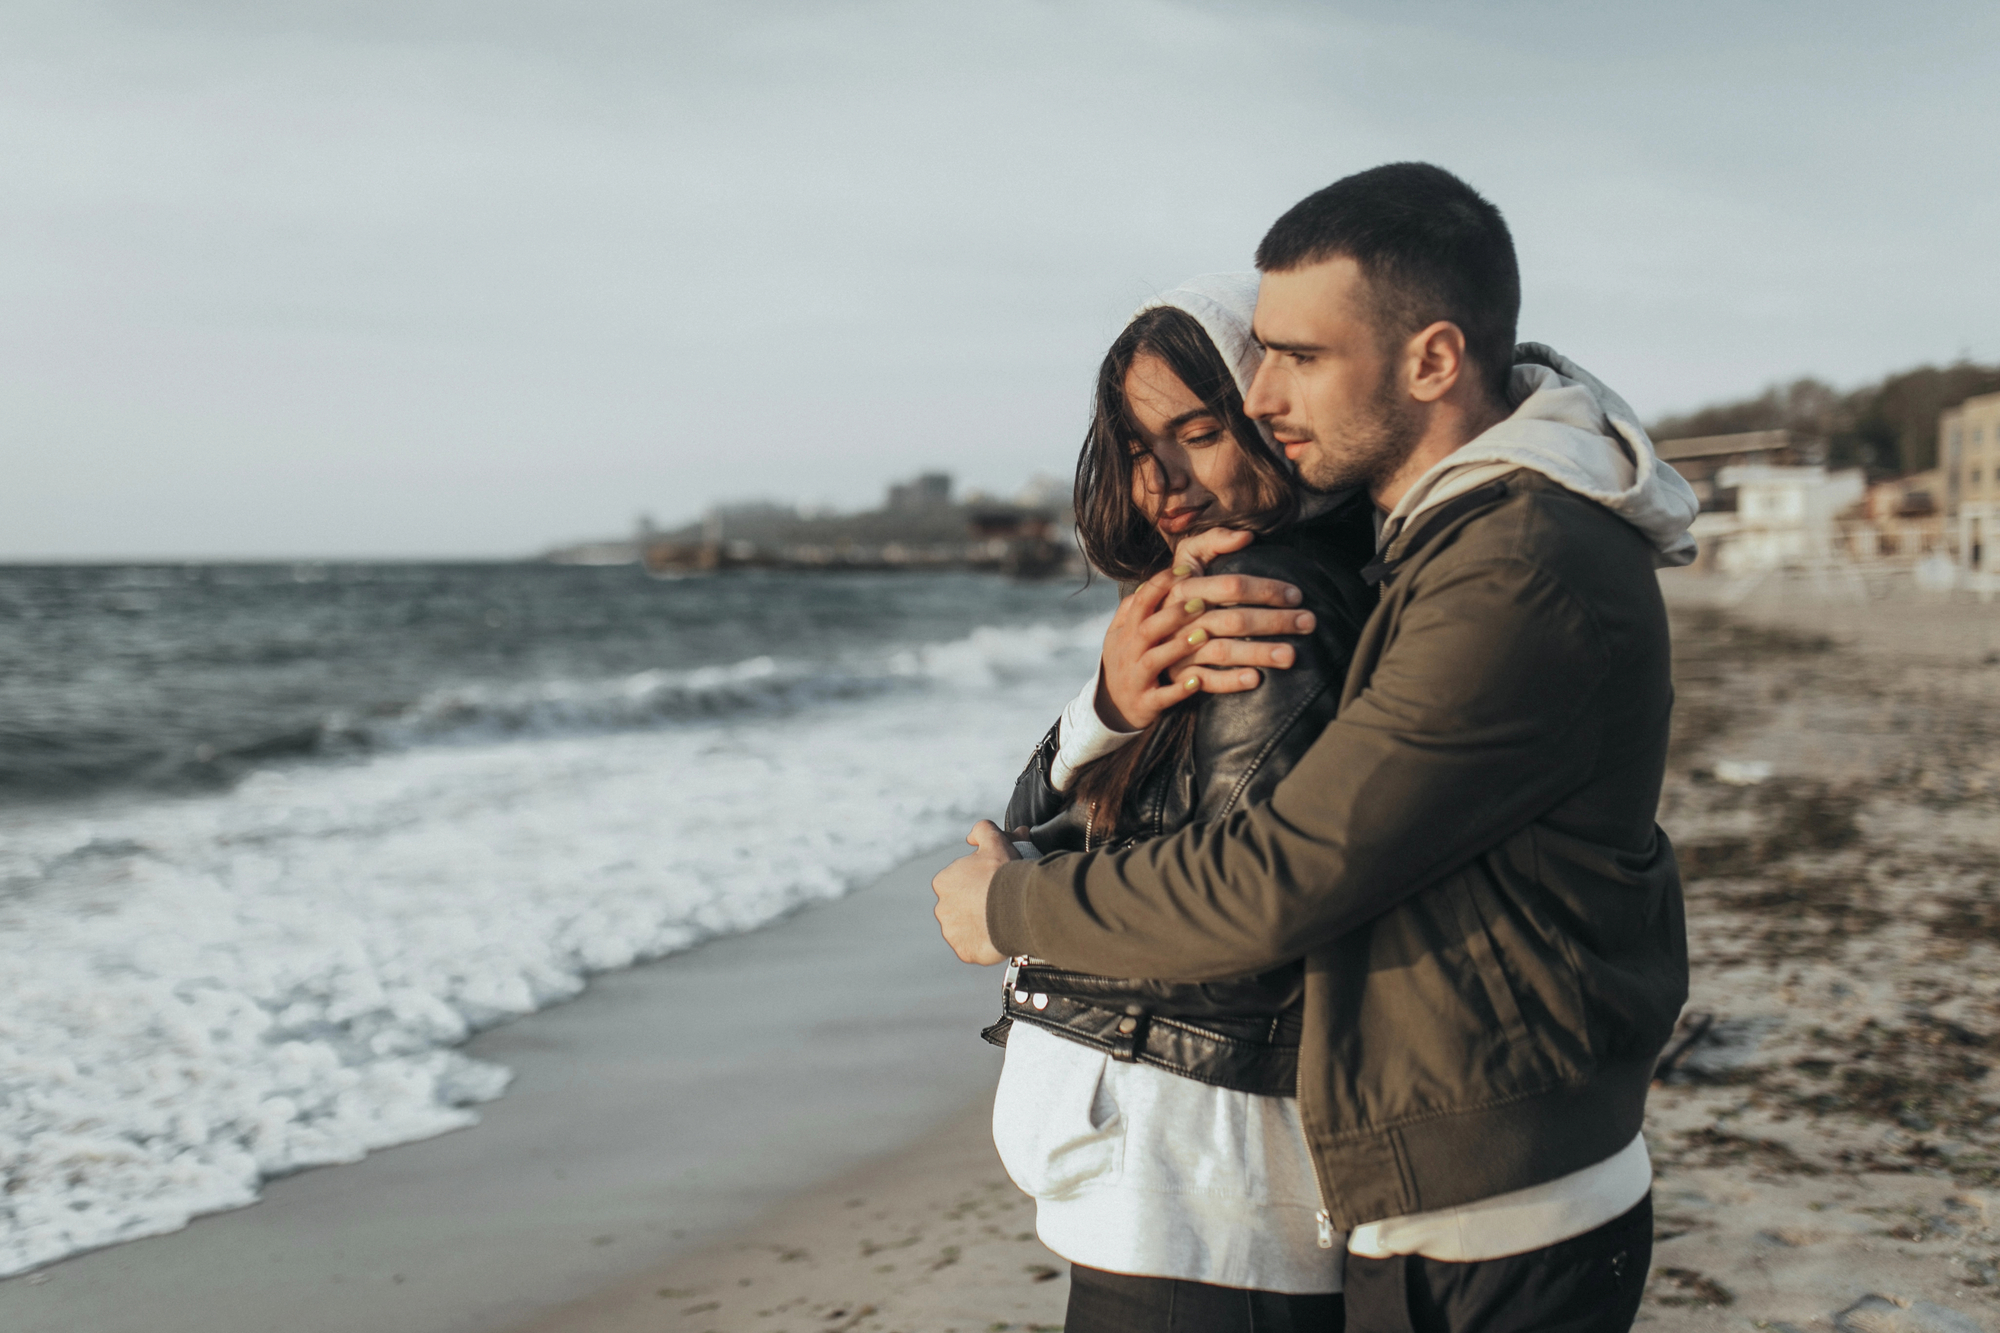 A couple embraces on a beach with waves in the background. The person on the right, wearing a green jacket, holds the other person, who is in a black leather jacket and hoodie, from behind. They both look calm and content on the sandy shore.